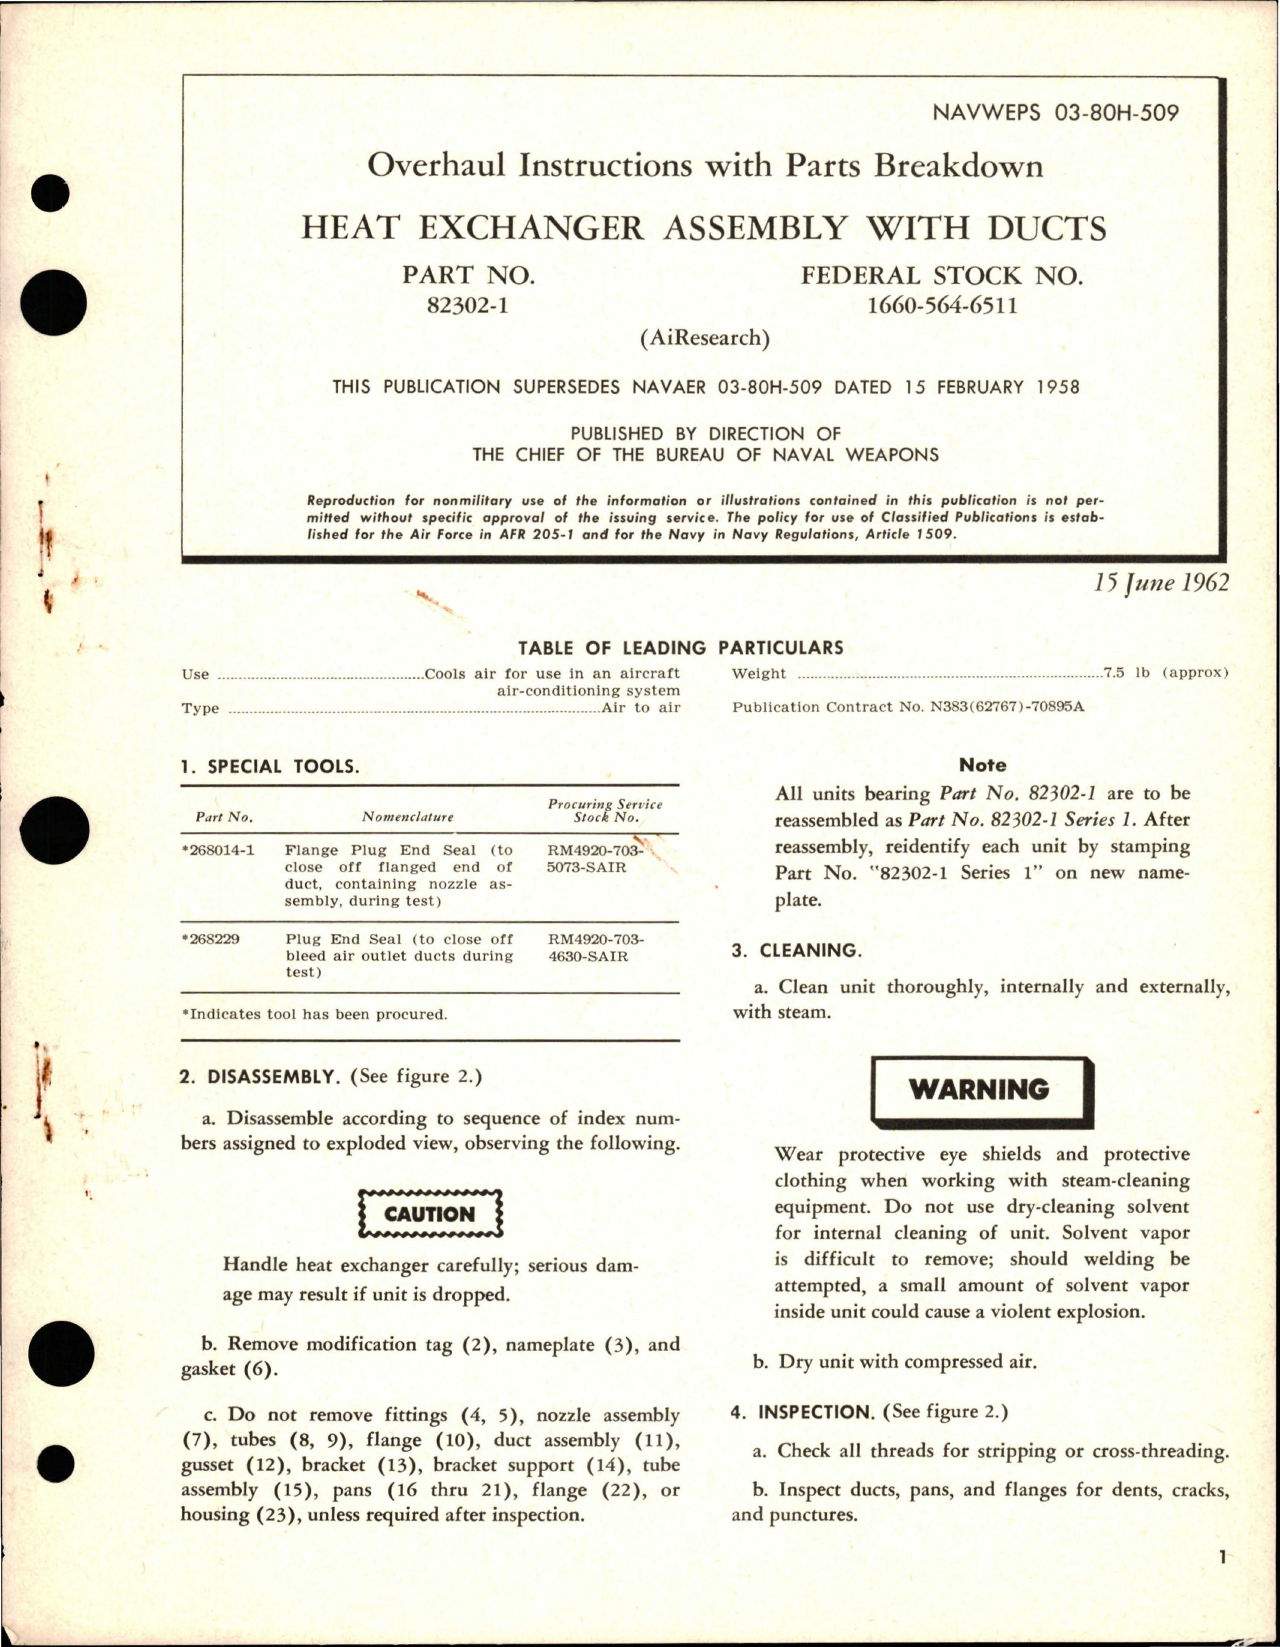 Sample page 1 from AirCorps Library document: Overhaul Instructions with Parts Breakdown for Heat Exchanger Assembly with Ducts - Part 82302-1